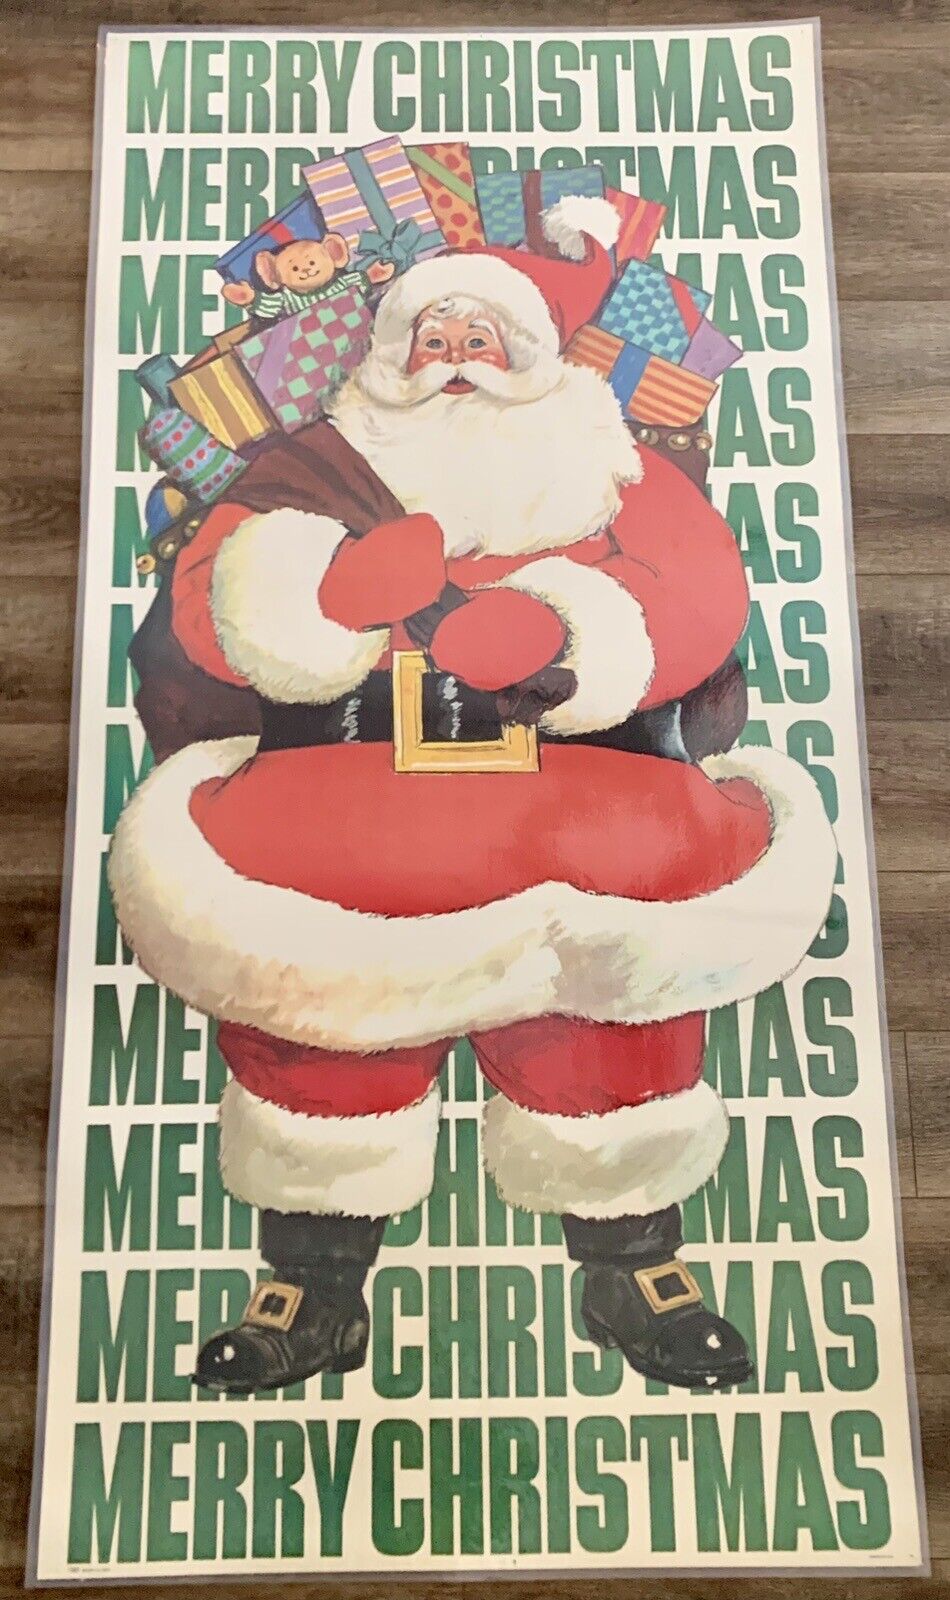 Vintage 1960’s Merry Christmas Santa Claus Door Poster Huge 6’ Laminated by PSI